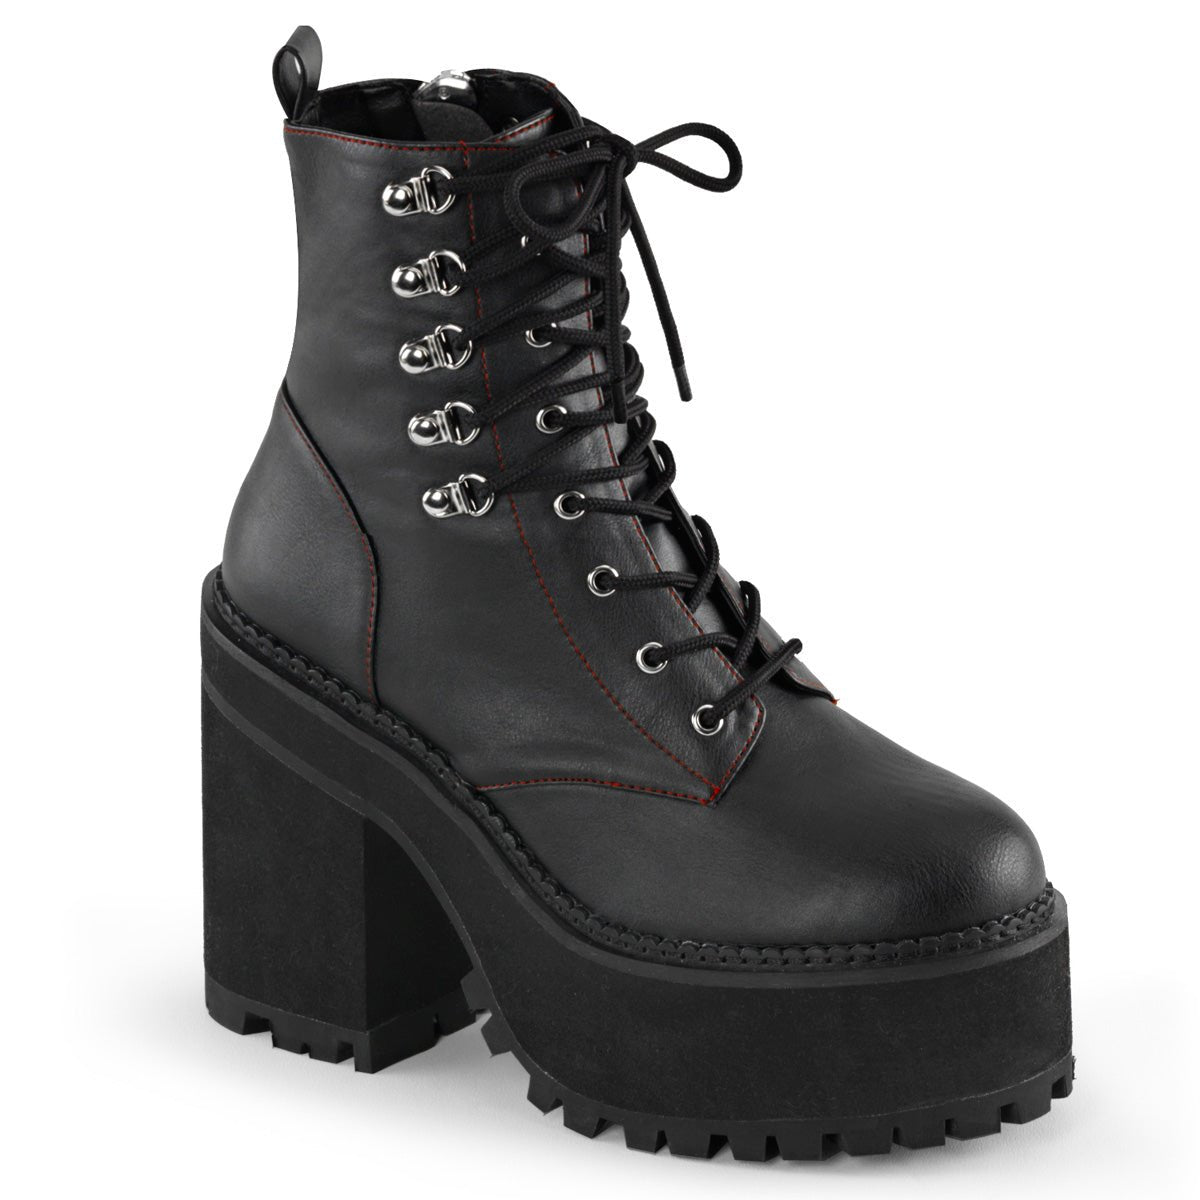 Too Fast | Demonia Assault 100 | Black Vegan Leather Women's Ankle Boots